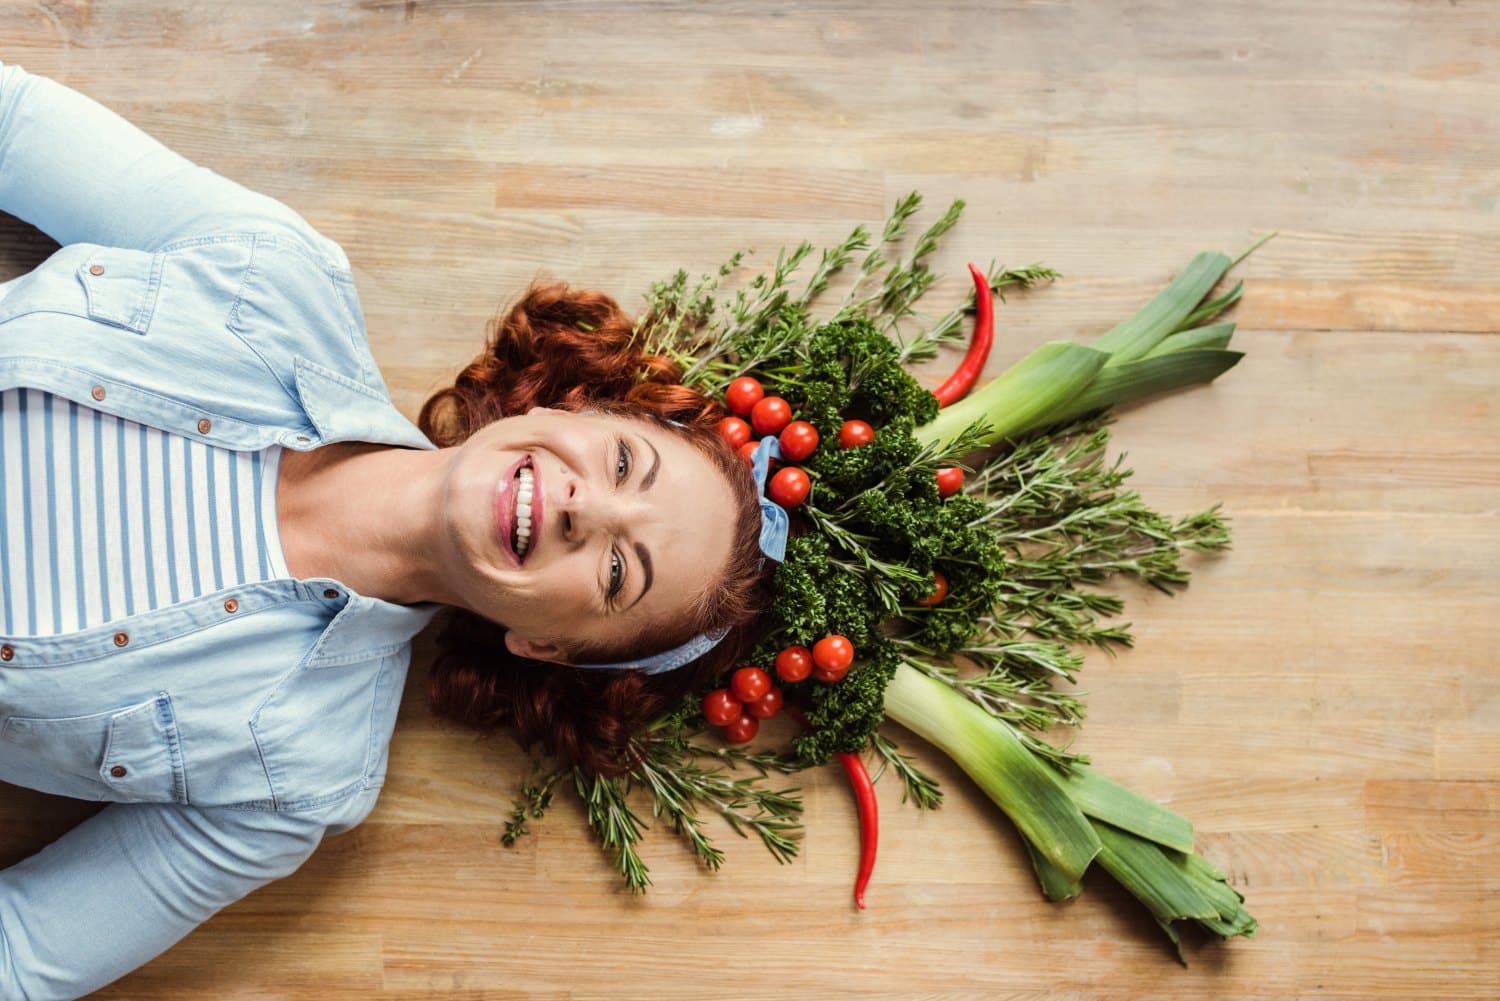 Top view of mature woman in fresh herb and vegetable crown smiling at camera